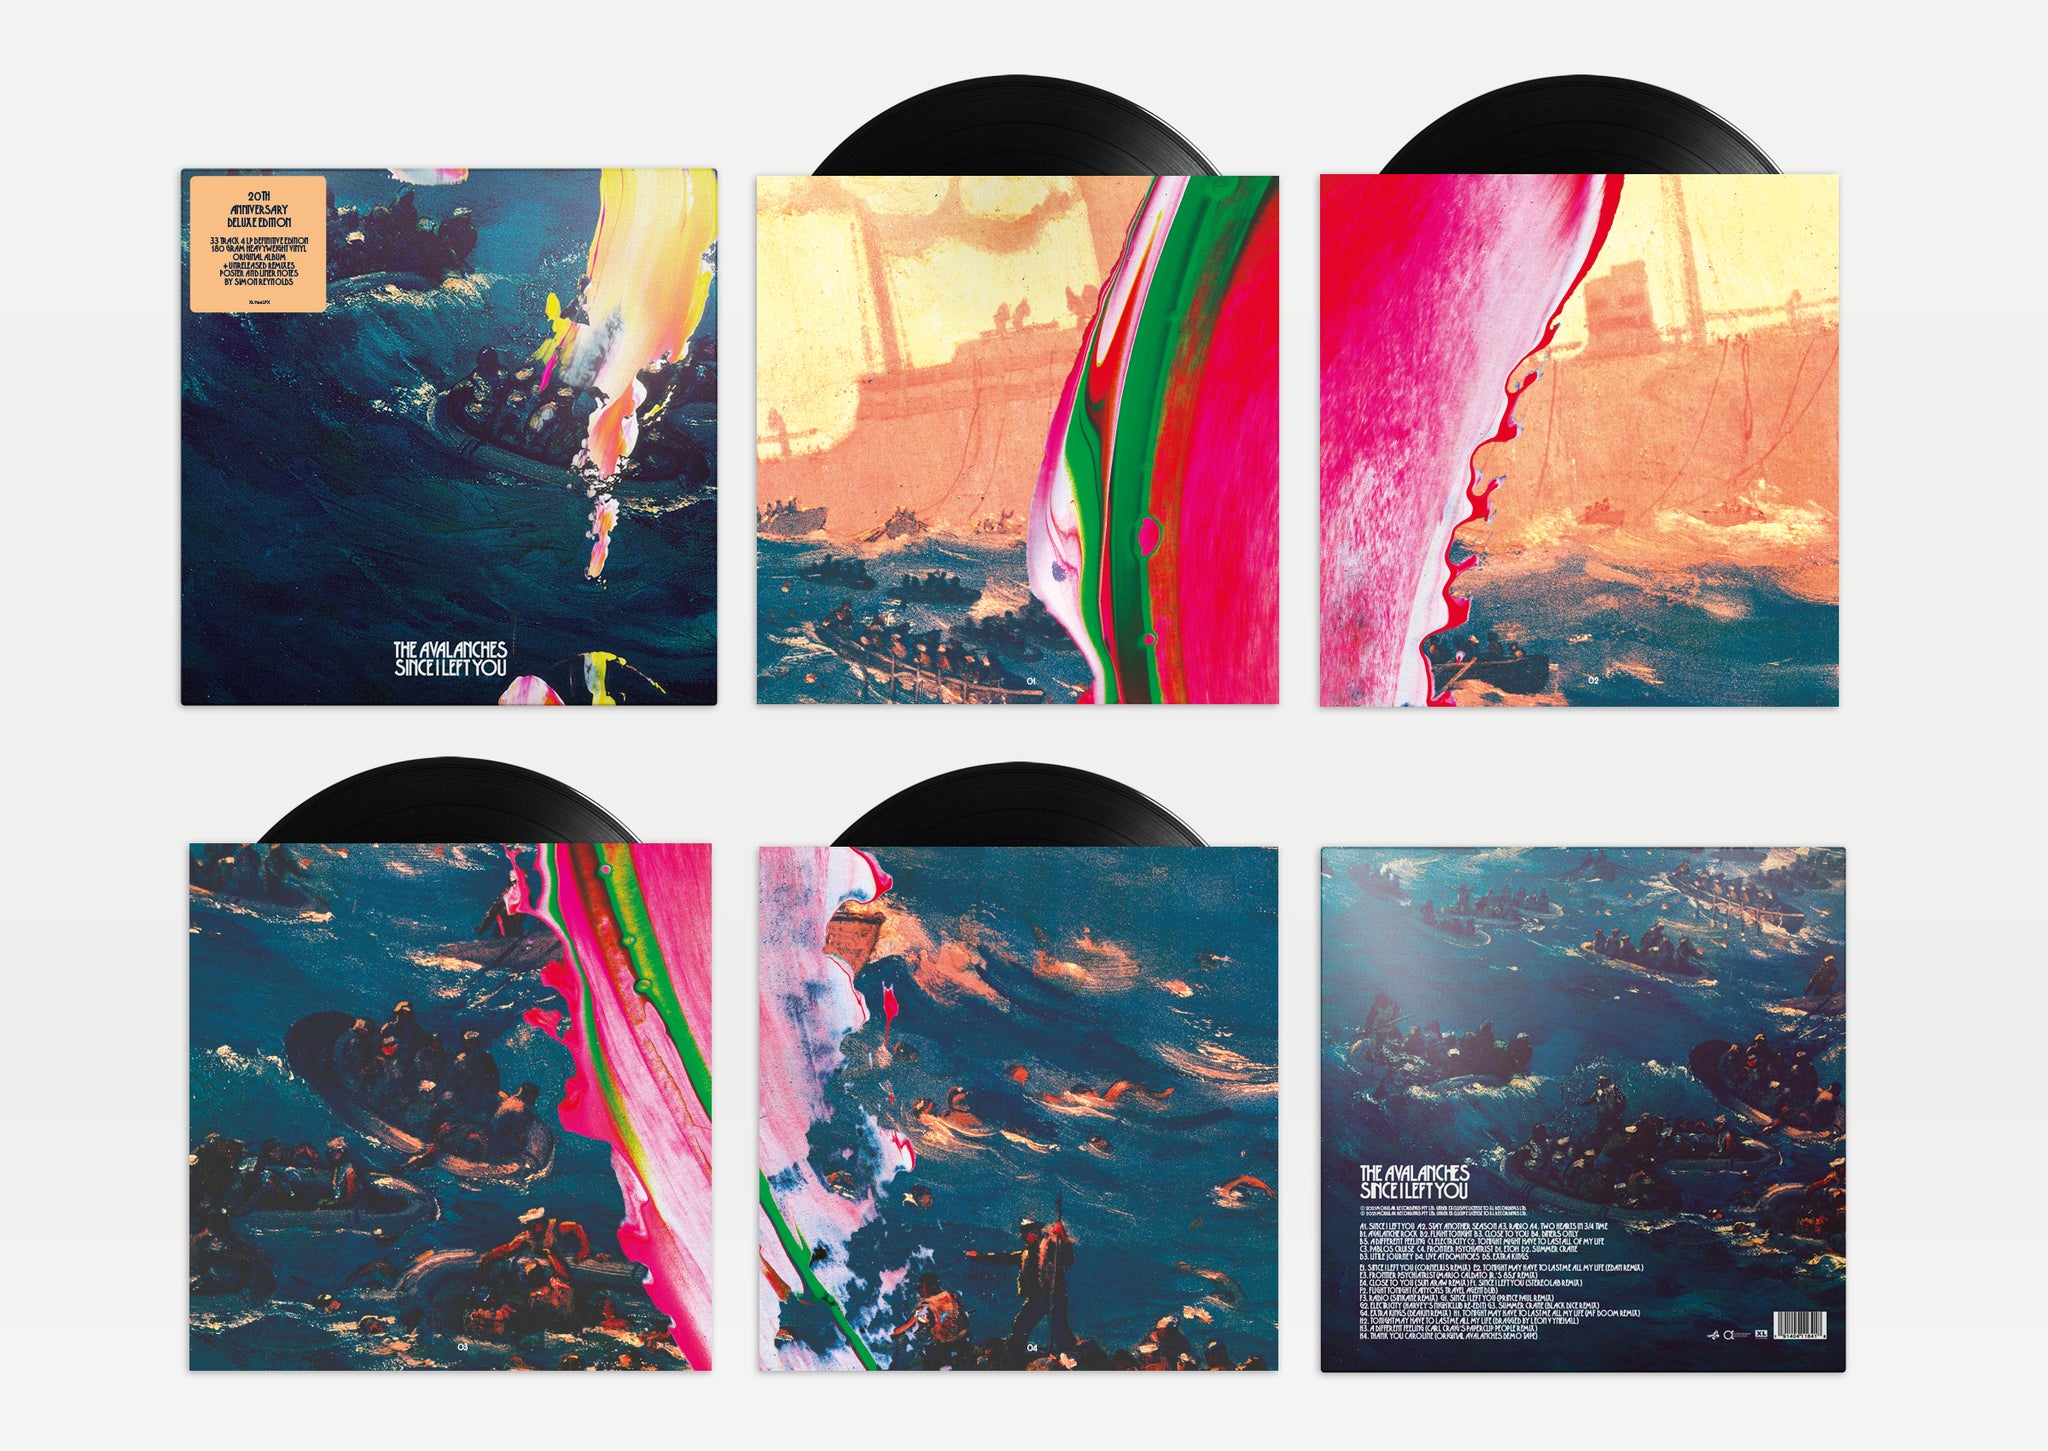 The Avalanches - Since I Left You (20th Anniversary Deluxe Edition 4LP Set)